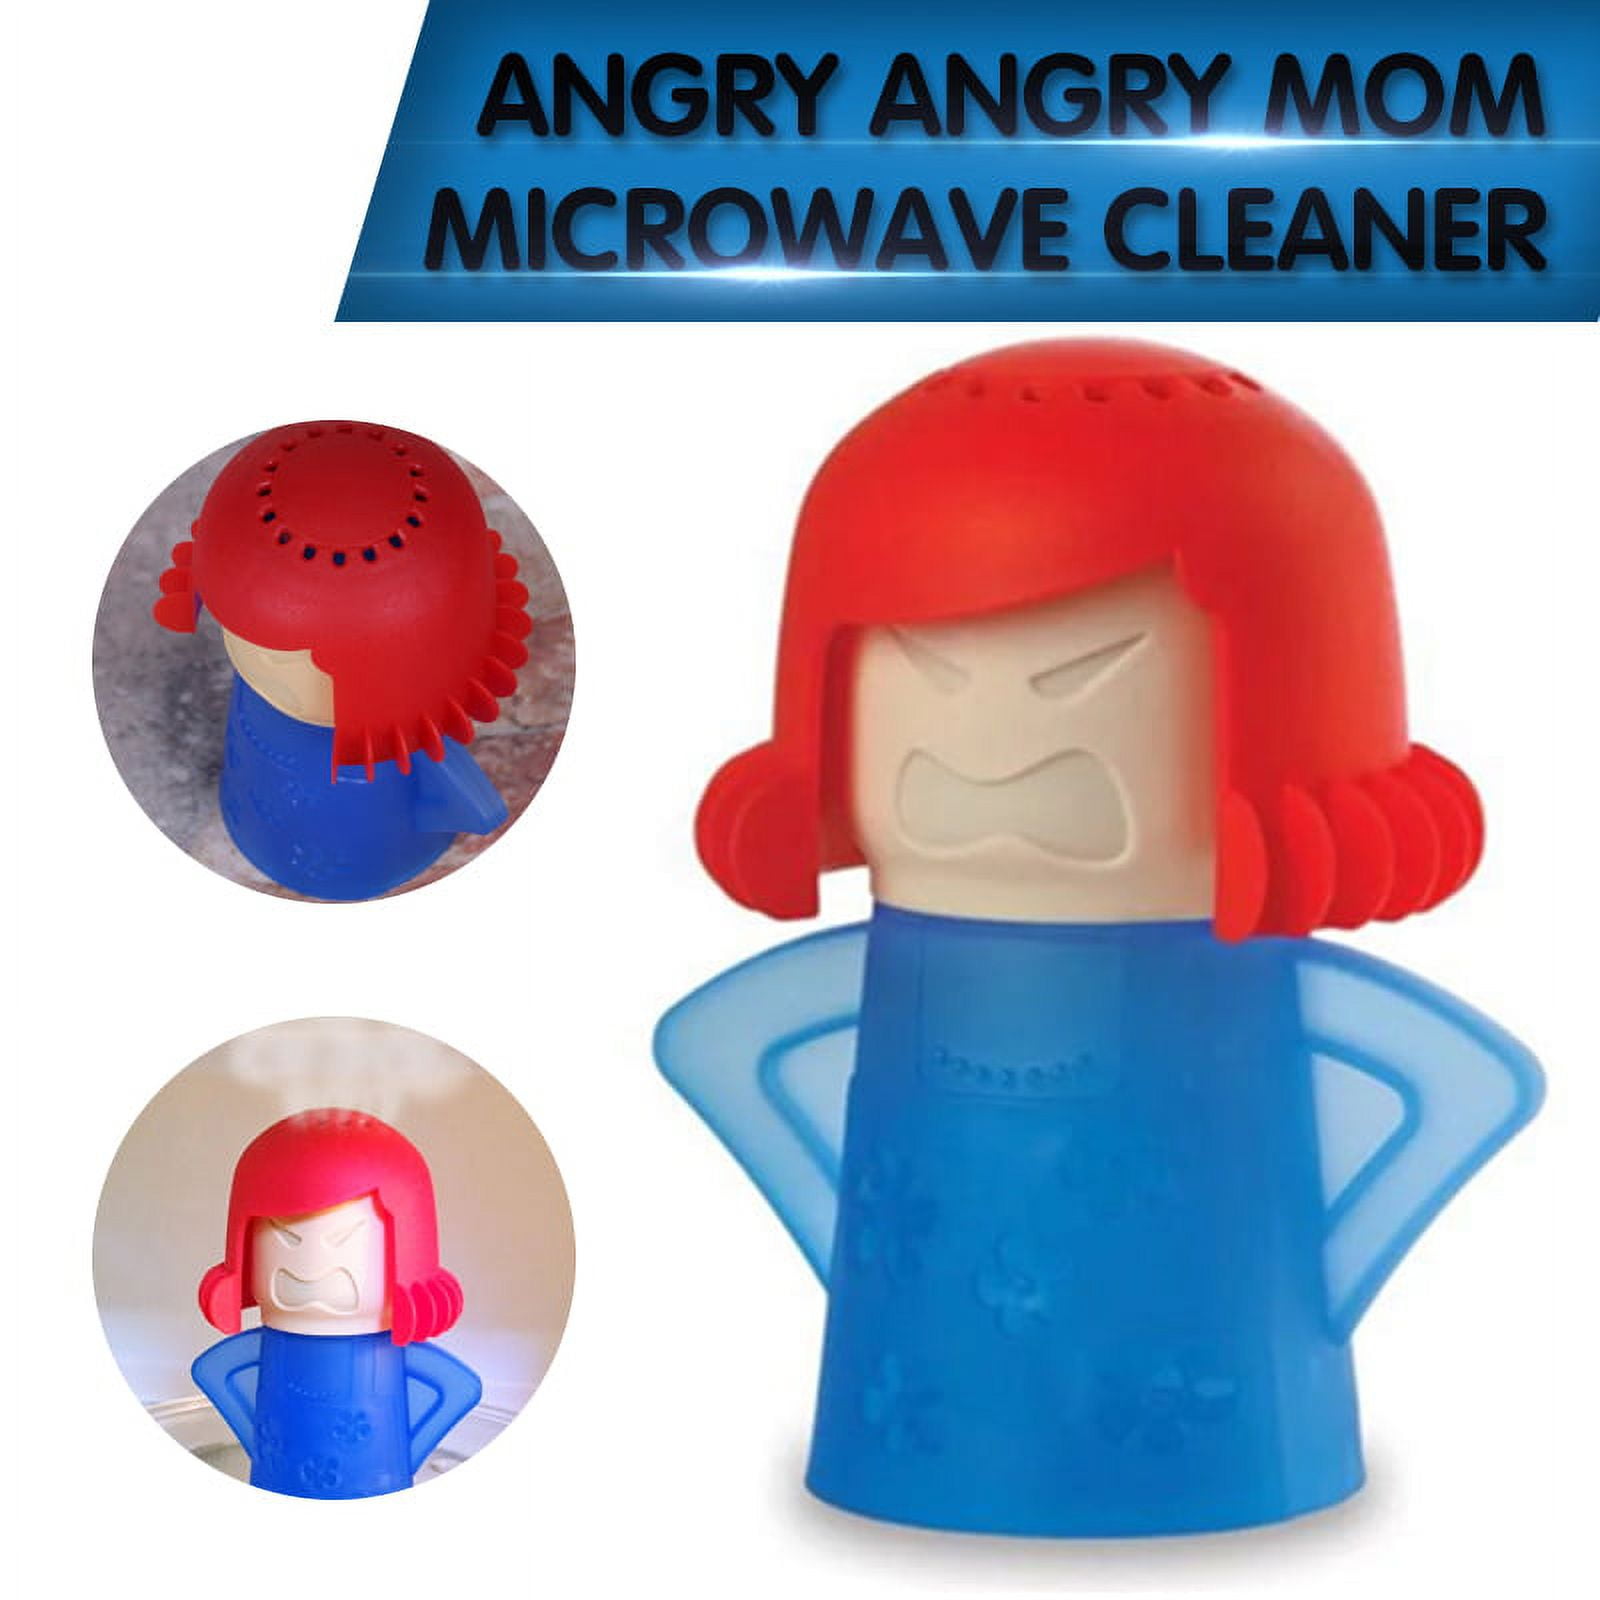 Angry Mama Microwave Cleaner Review FB Live, By As Seen On TV Reviews